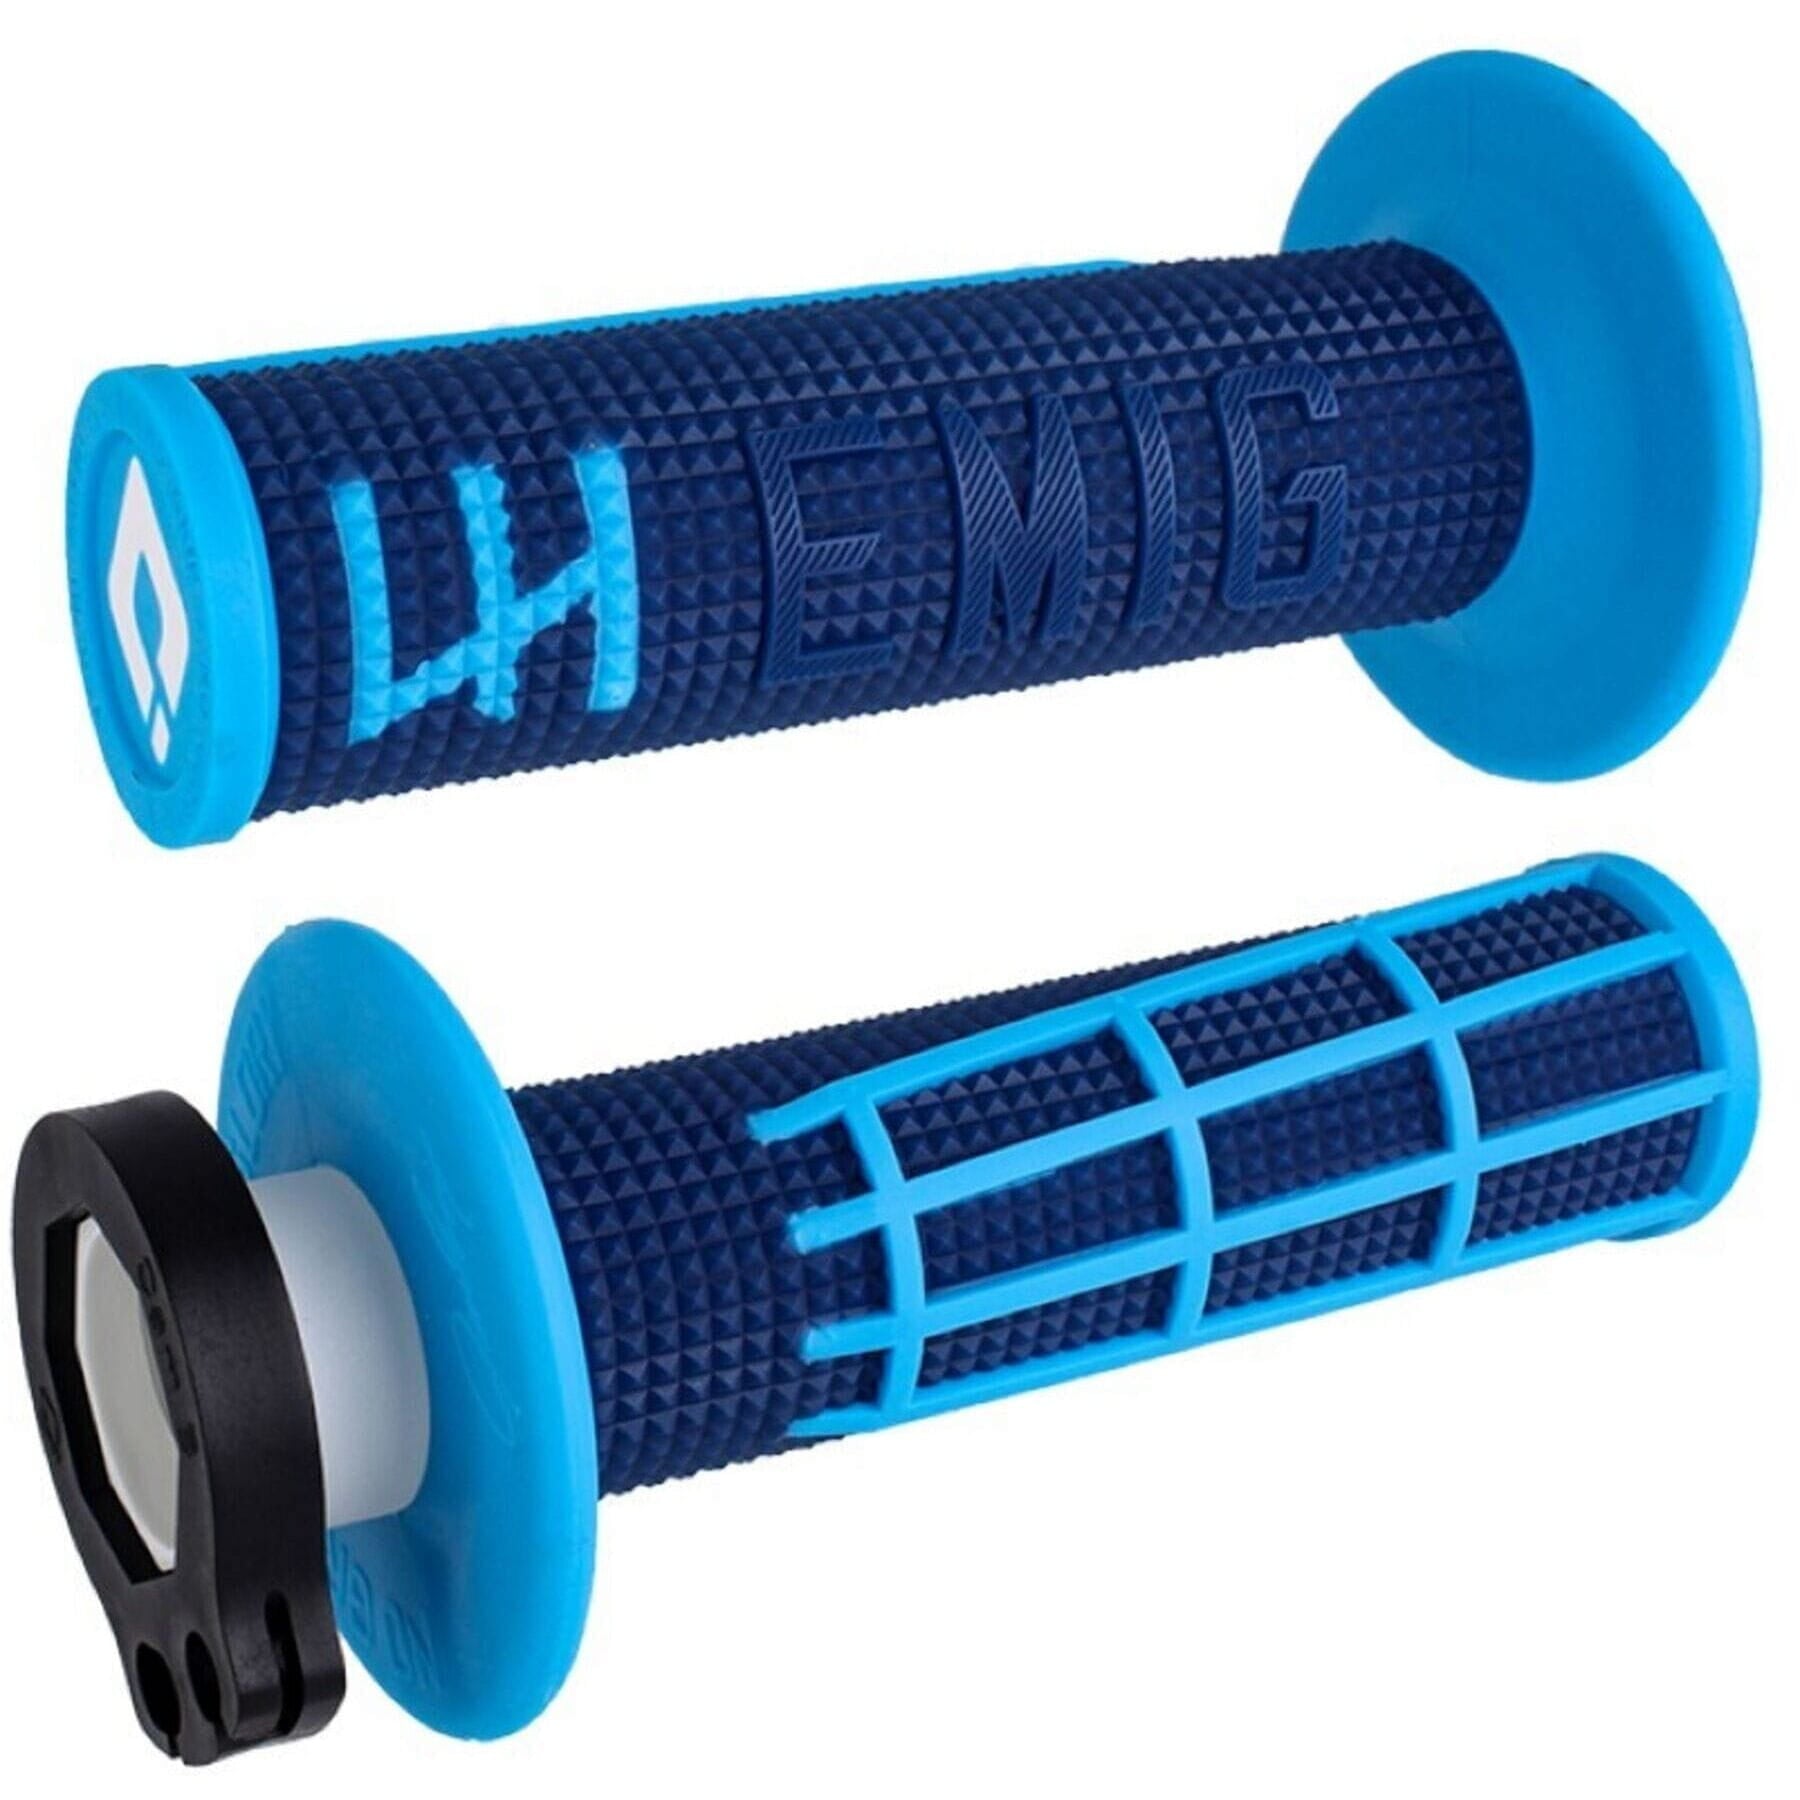 EMIG 2.0 Lock On Grip in Navy and Cyan Color